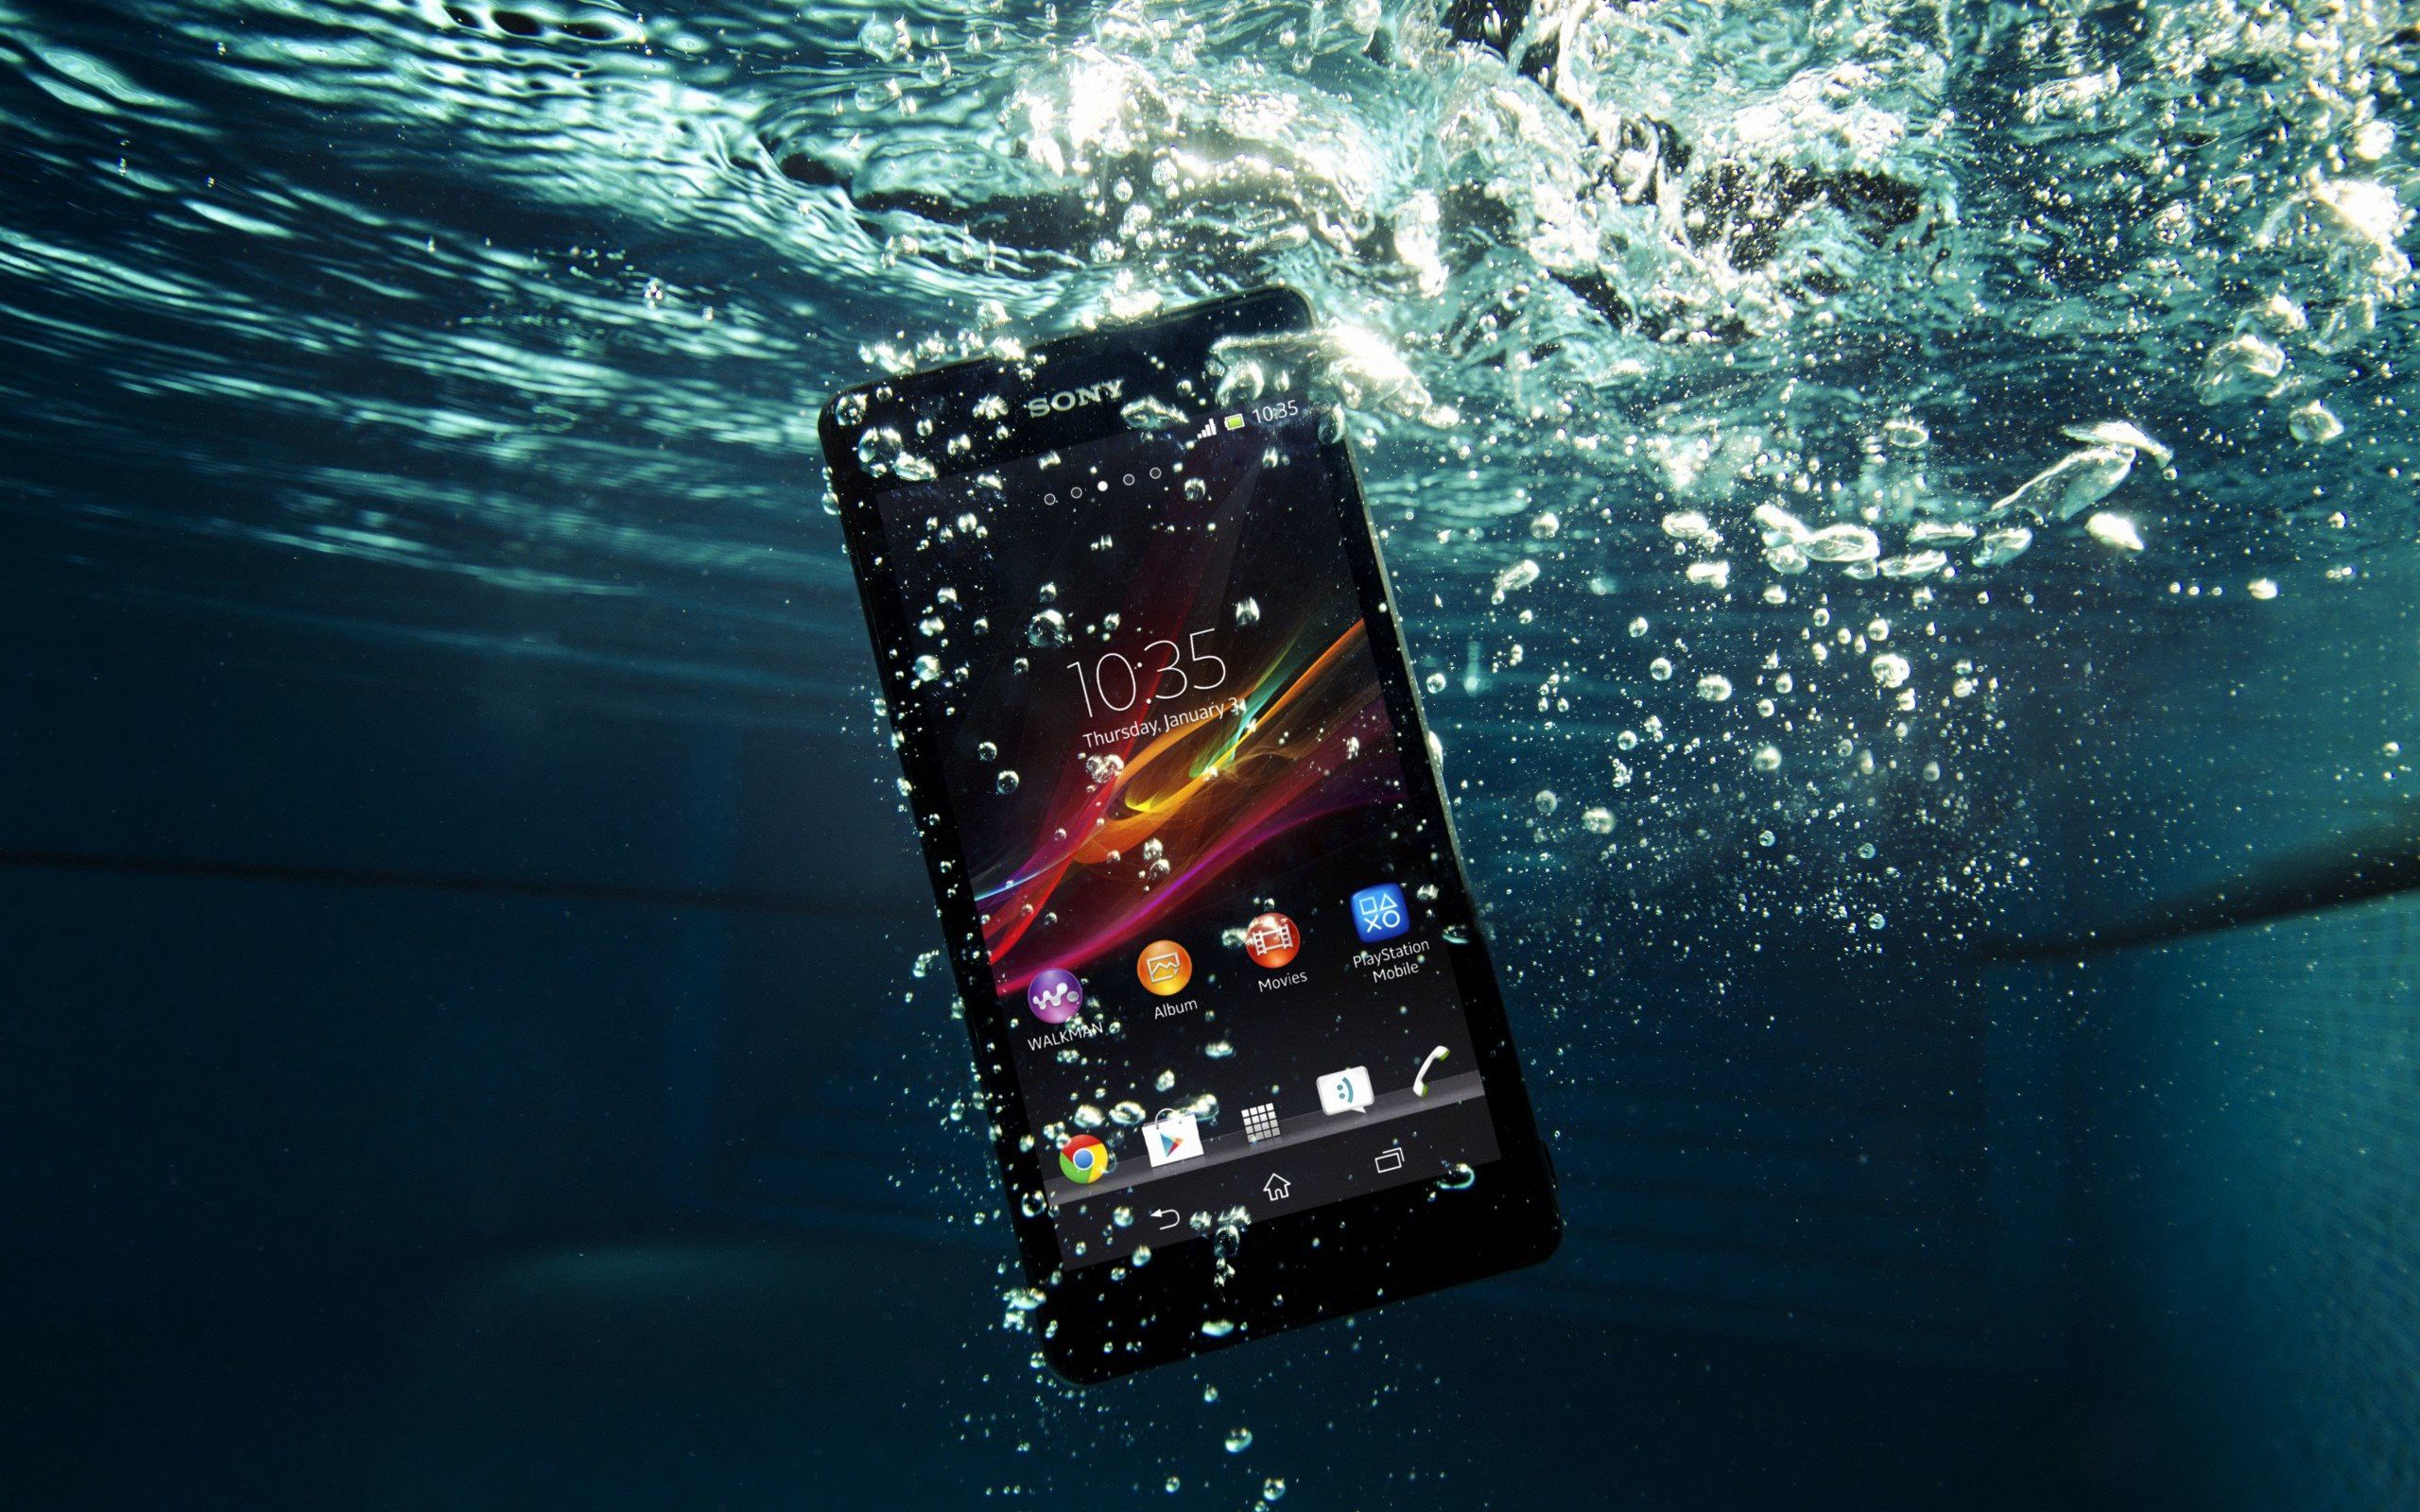 Sony Xperia ZR Phone Water HD Wallpaper - New HD Backgrounds